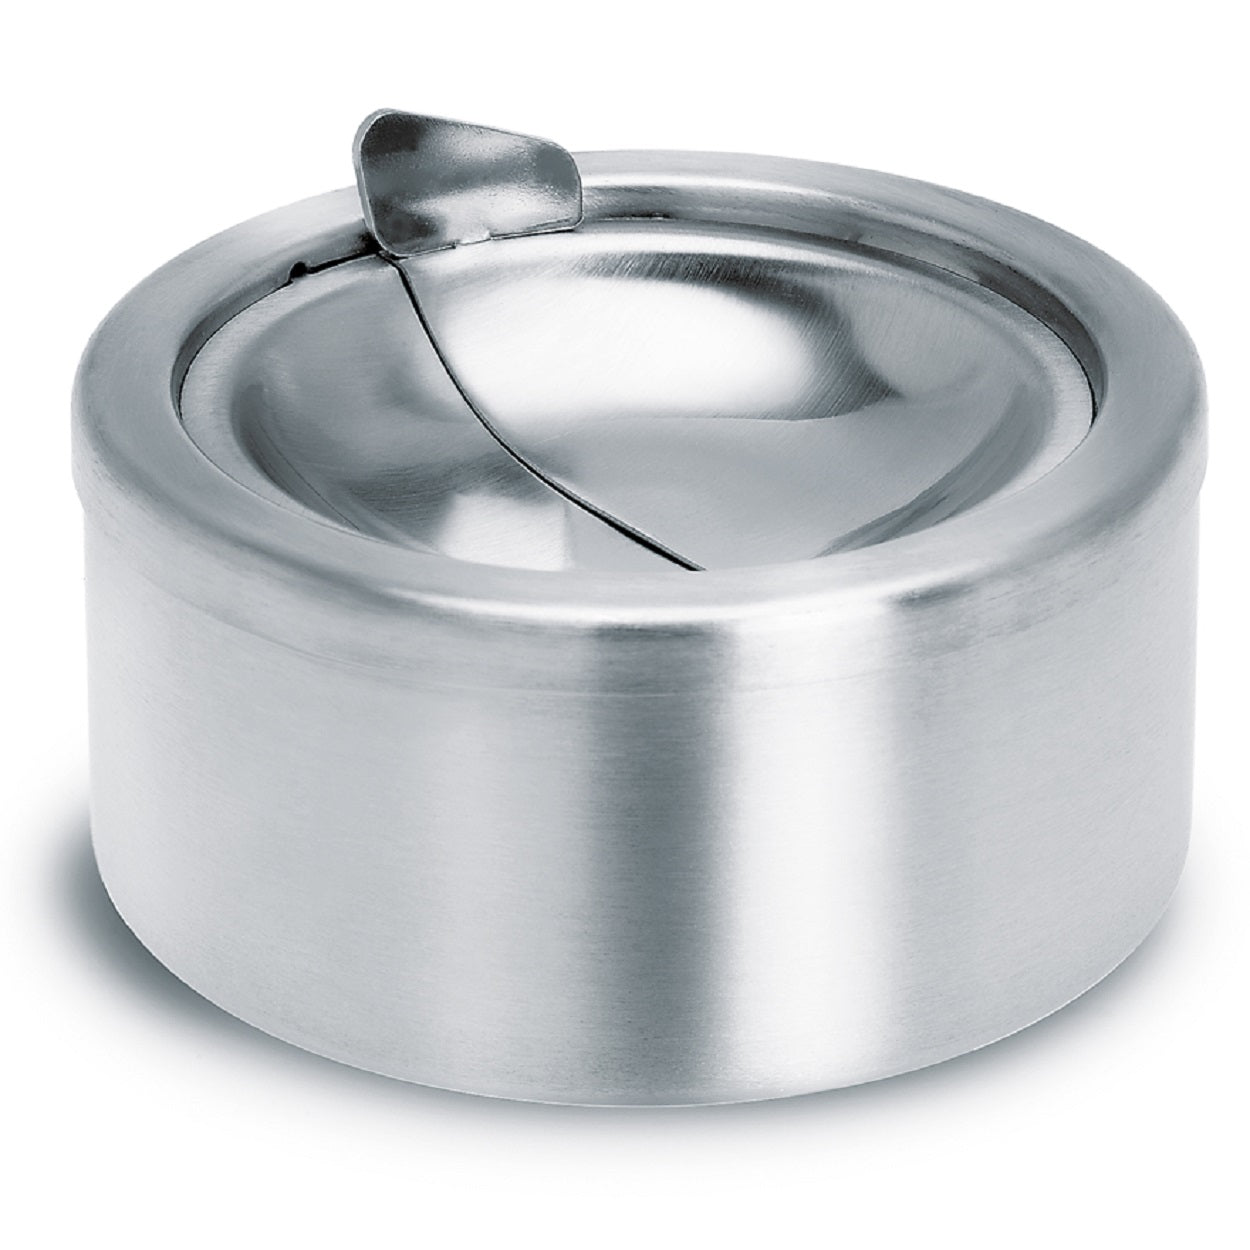 blomus Ashtray in Stainless Steel - PATTY